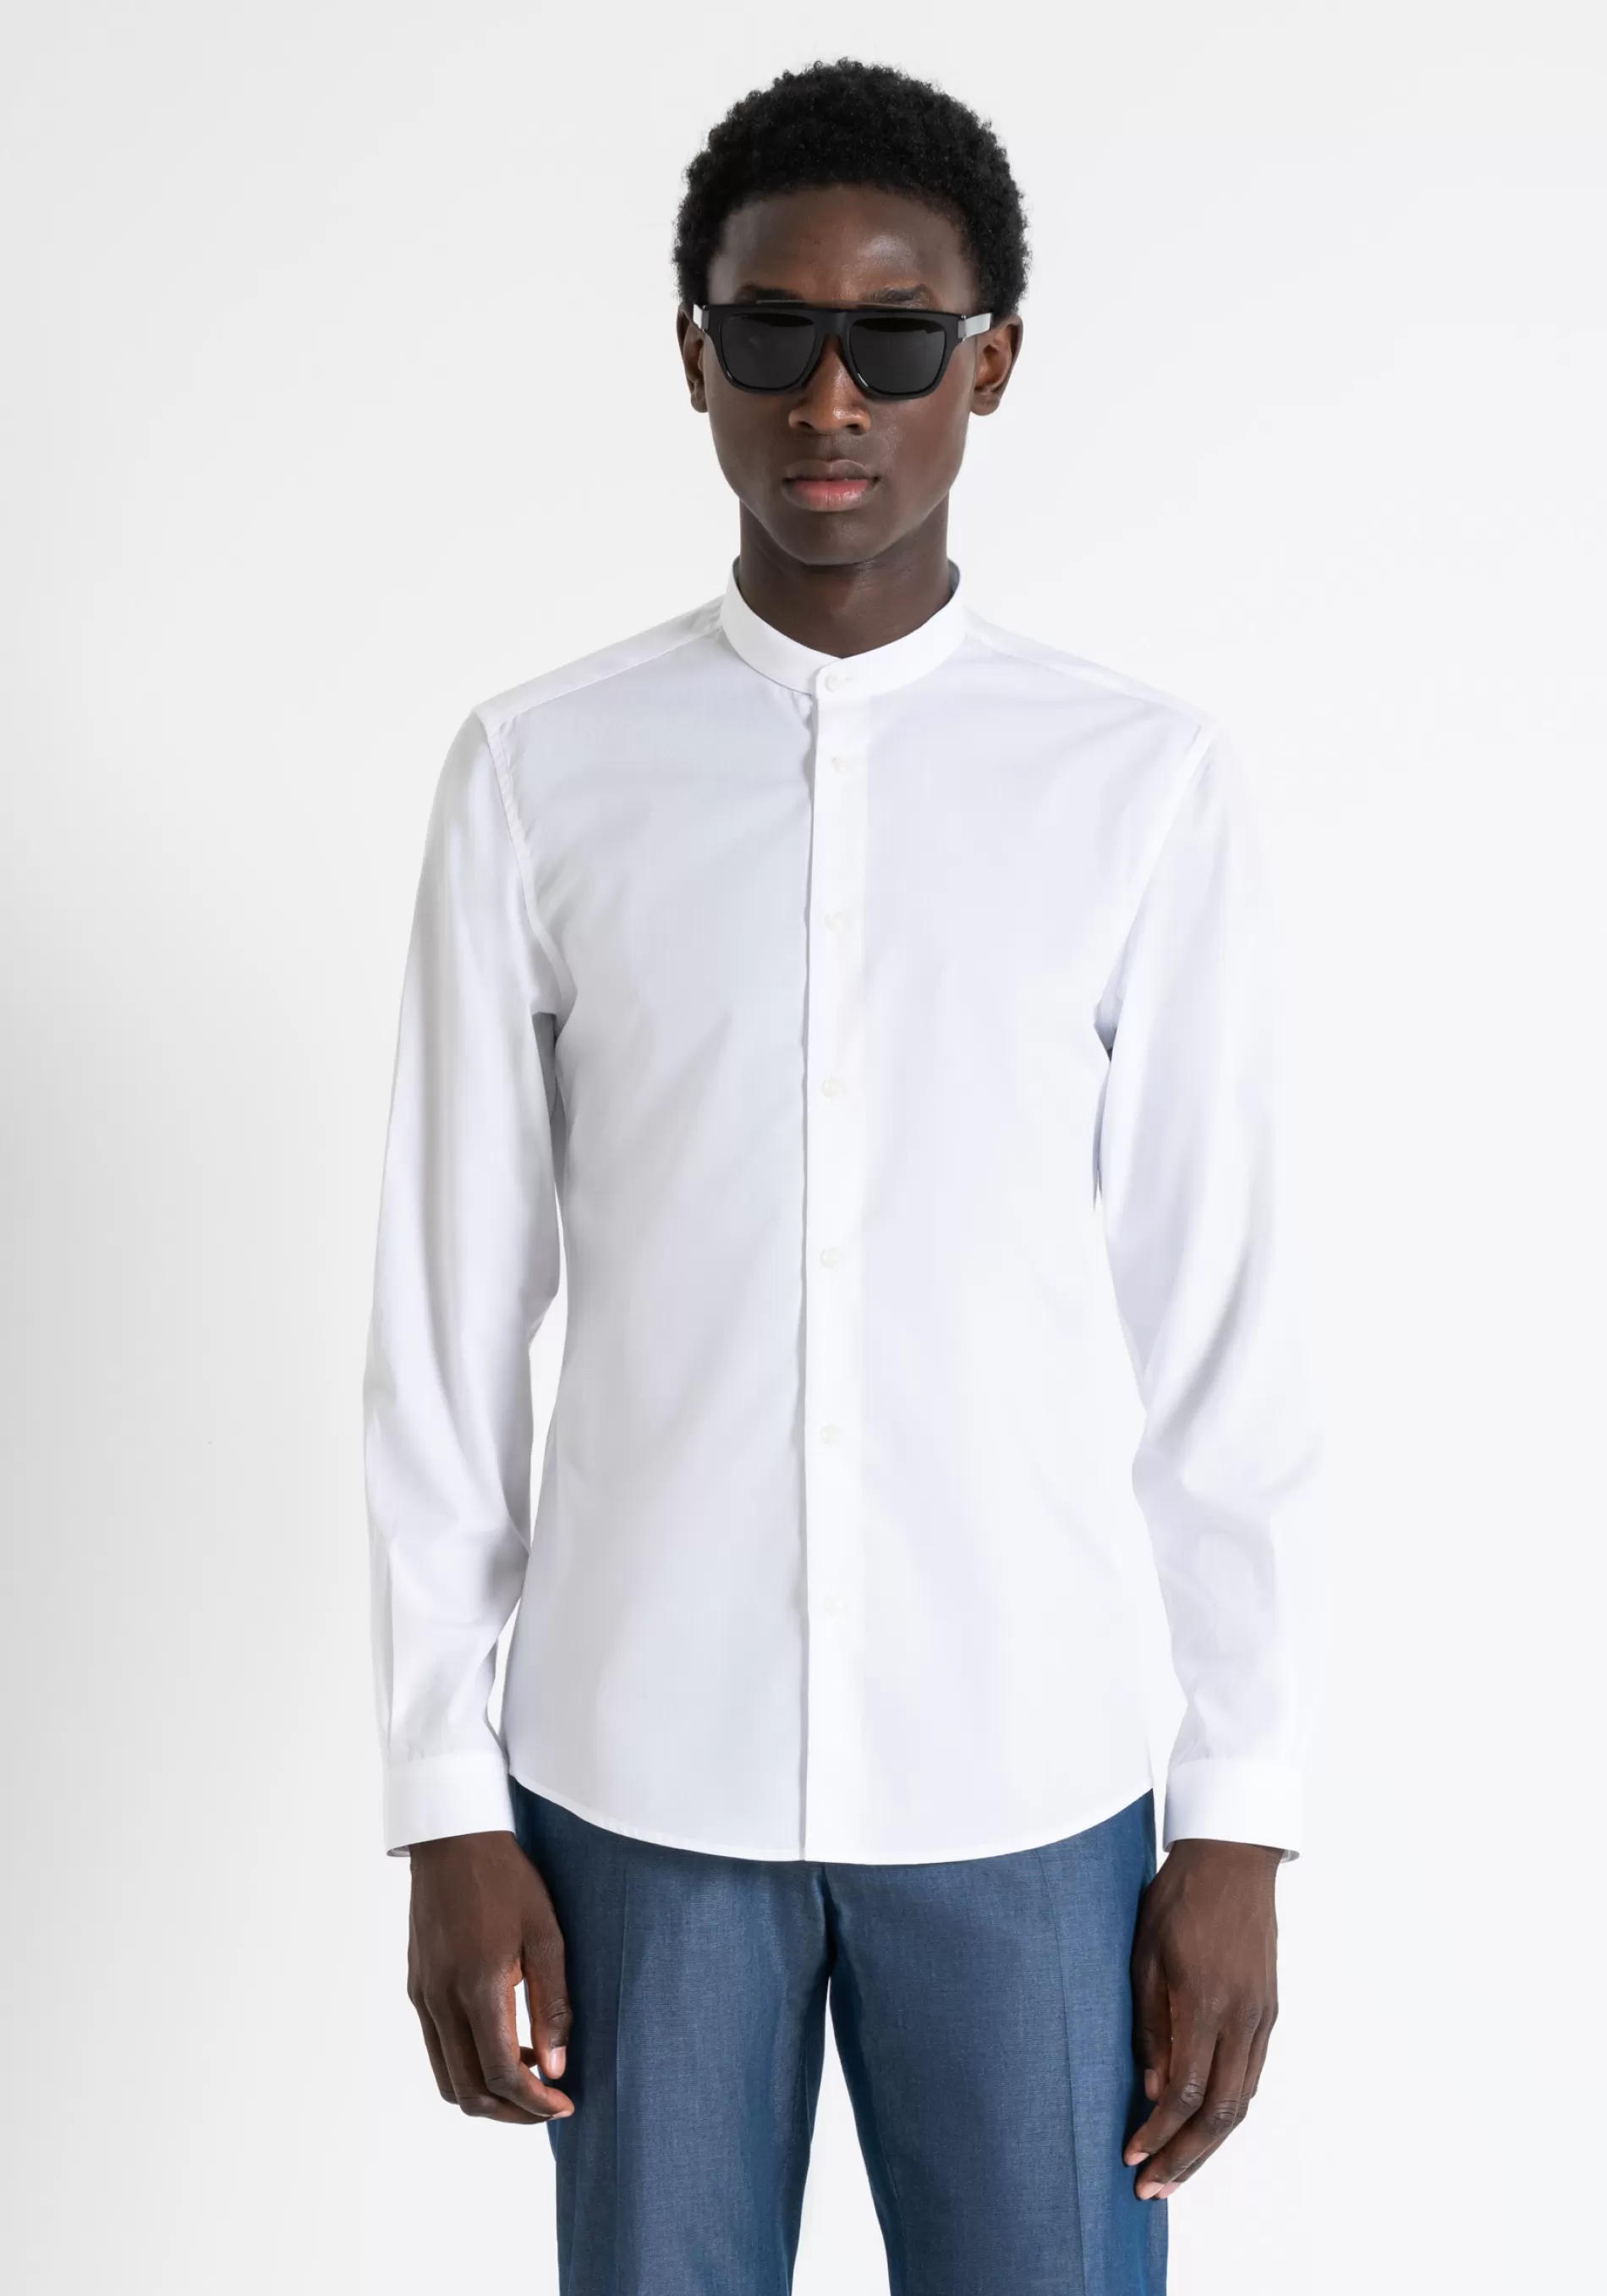 Sale "SEOUL" SLIM FIT SHIRT IN EASY IRON COTTON Shirts